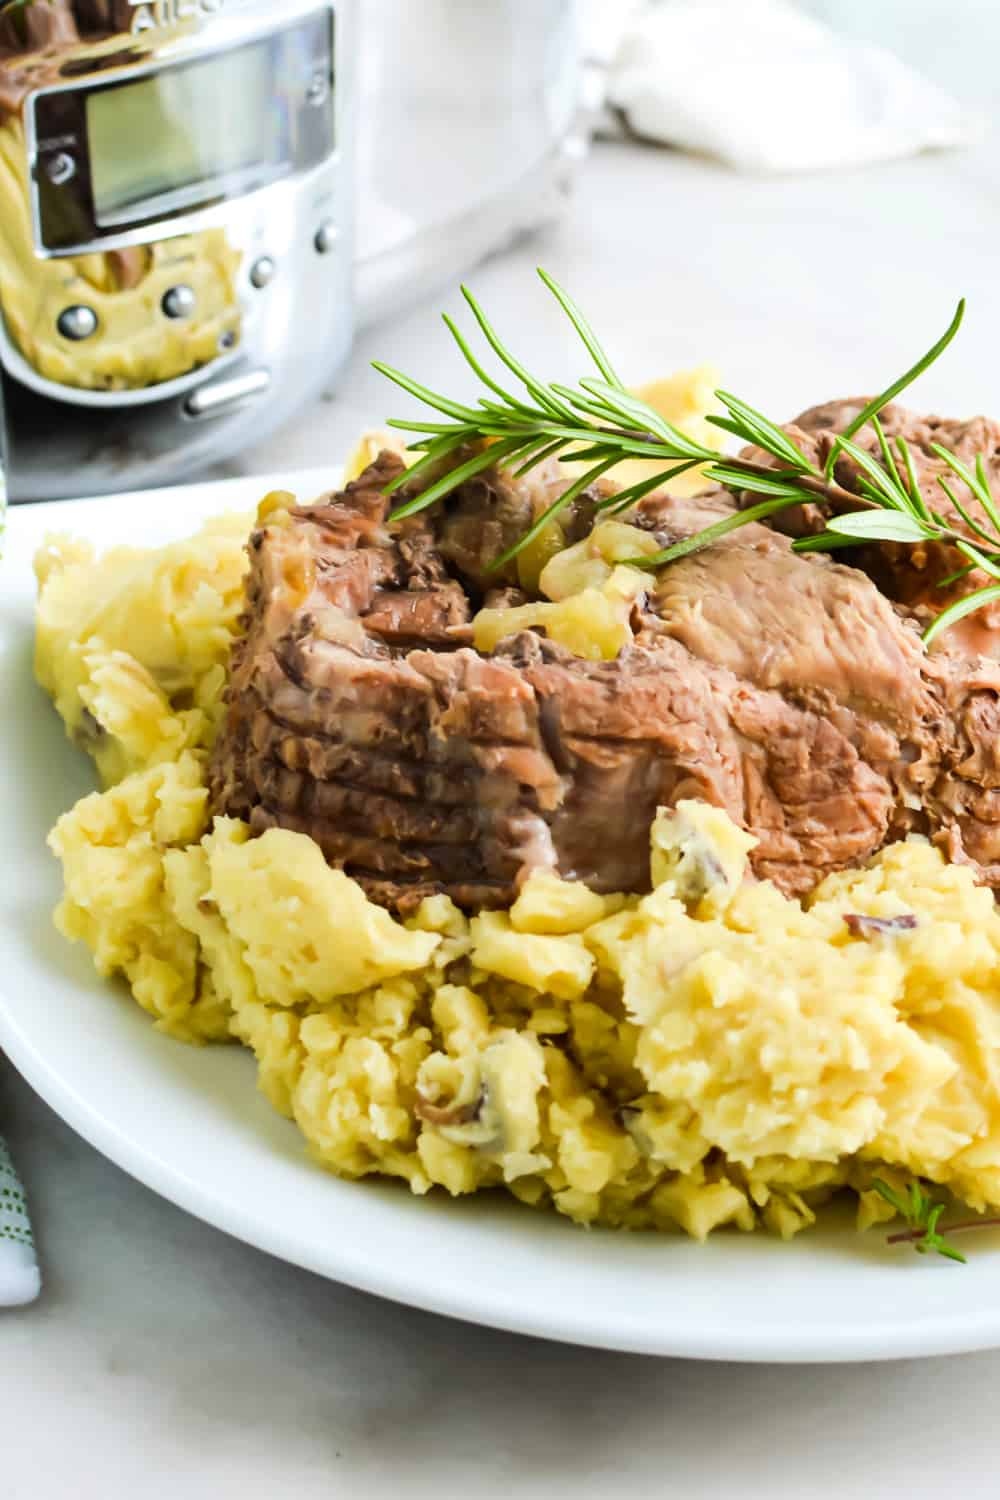 Slow cooker pork roast on a bed of mashed potatoes.